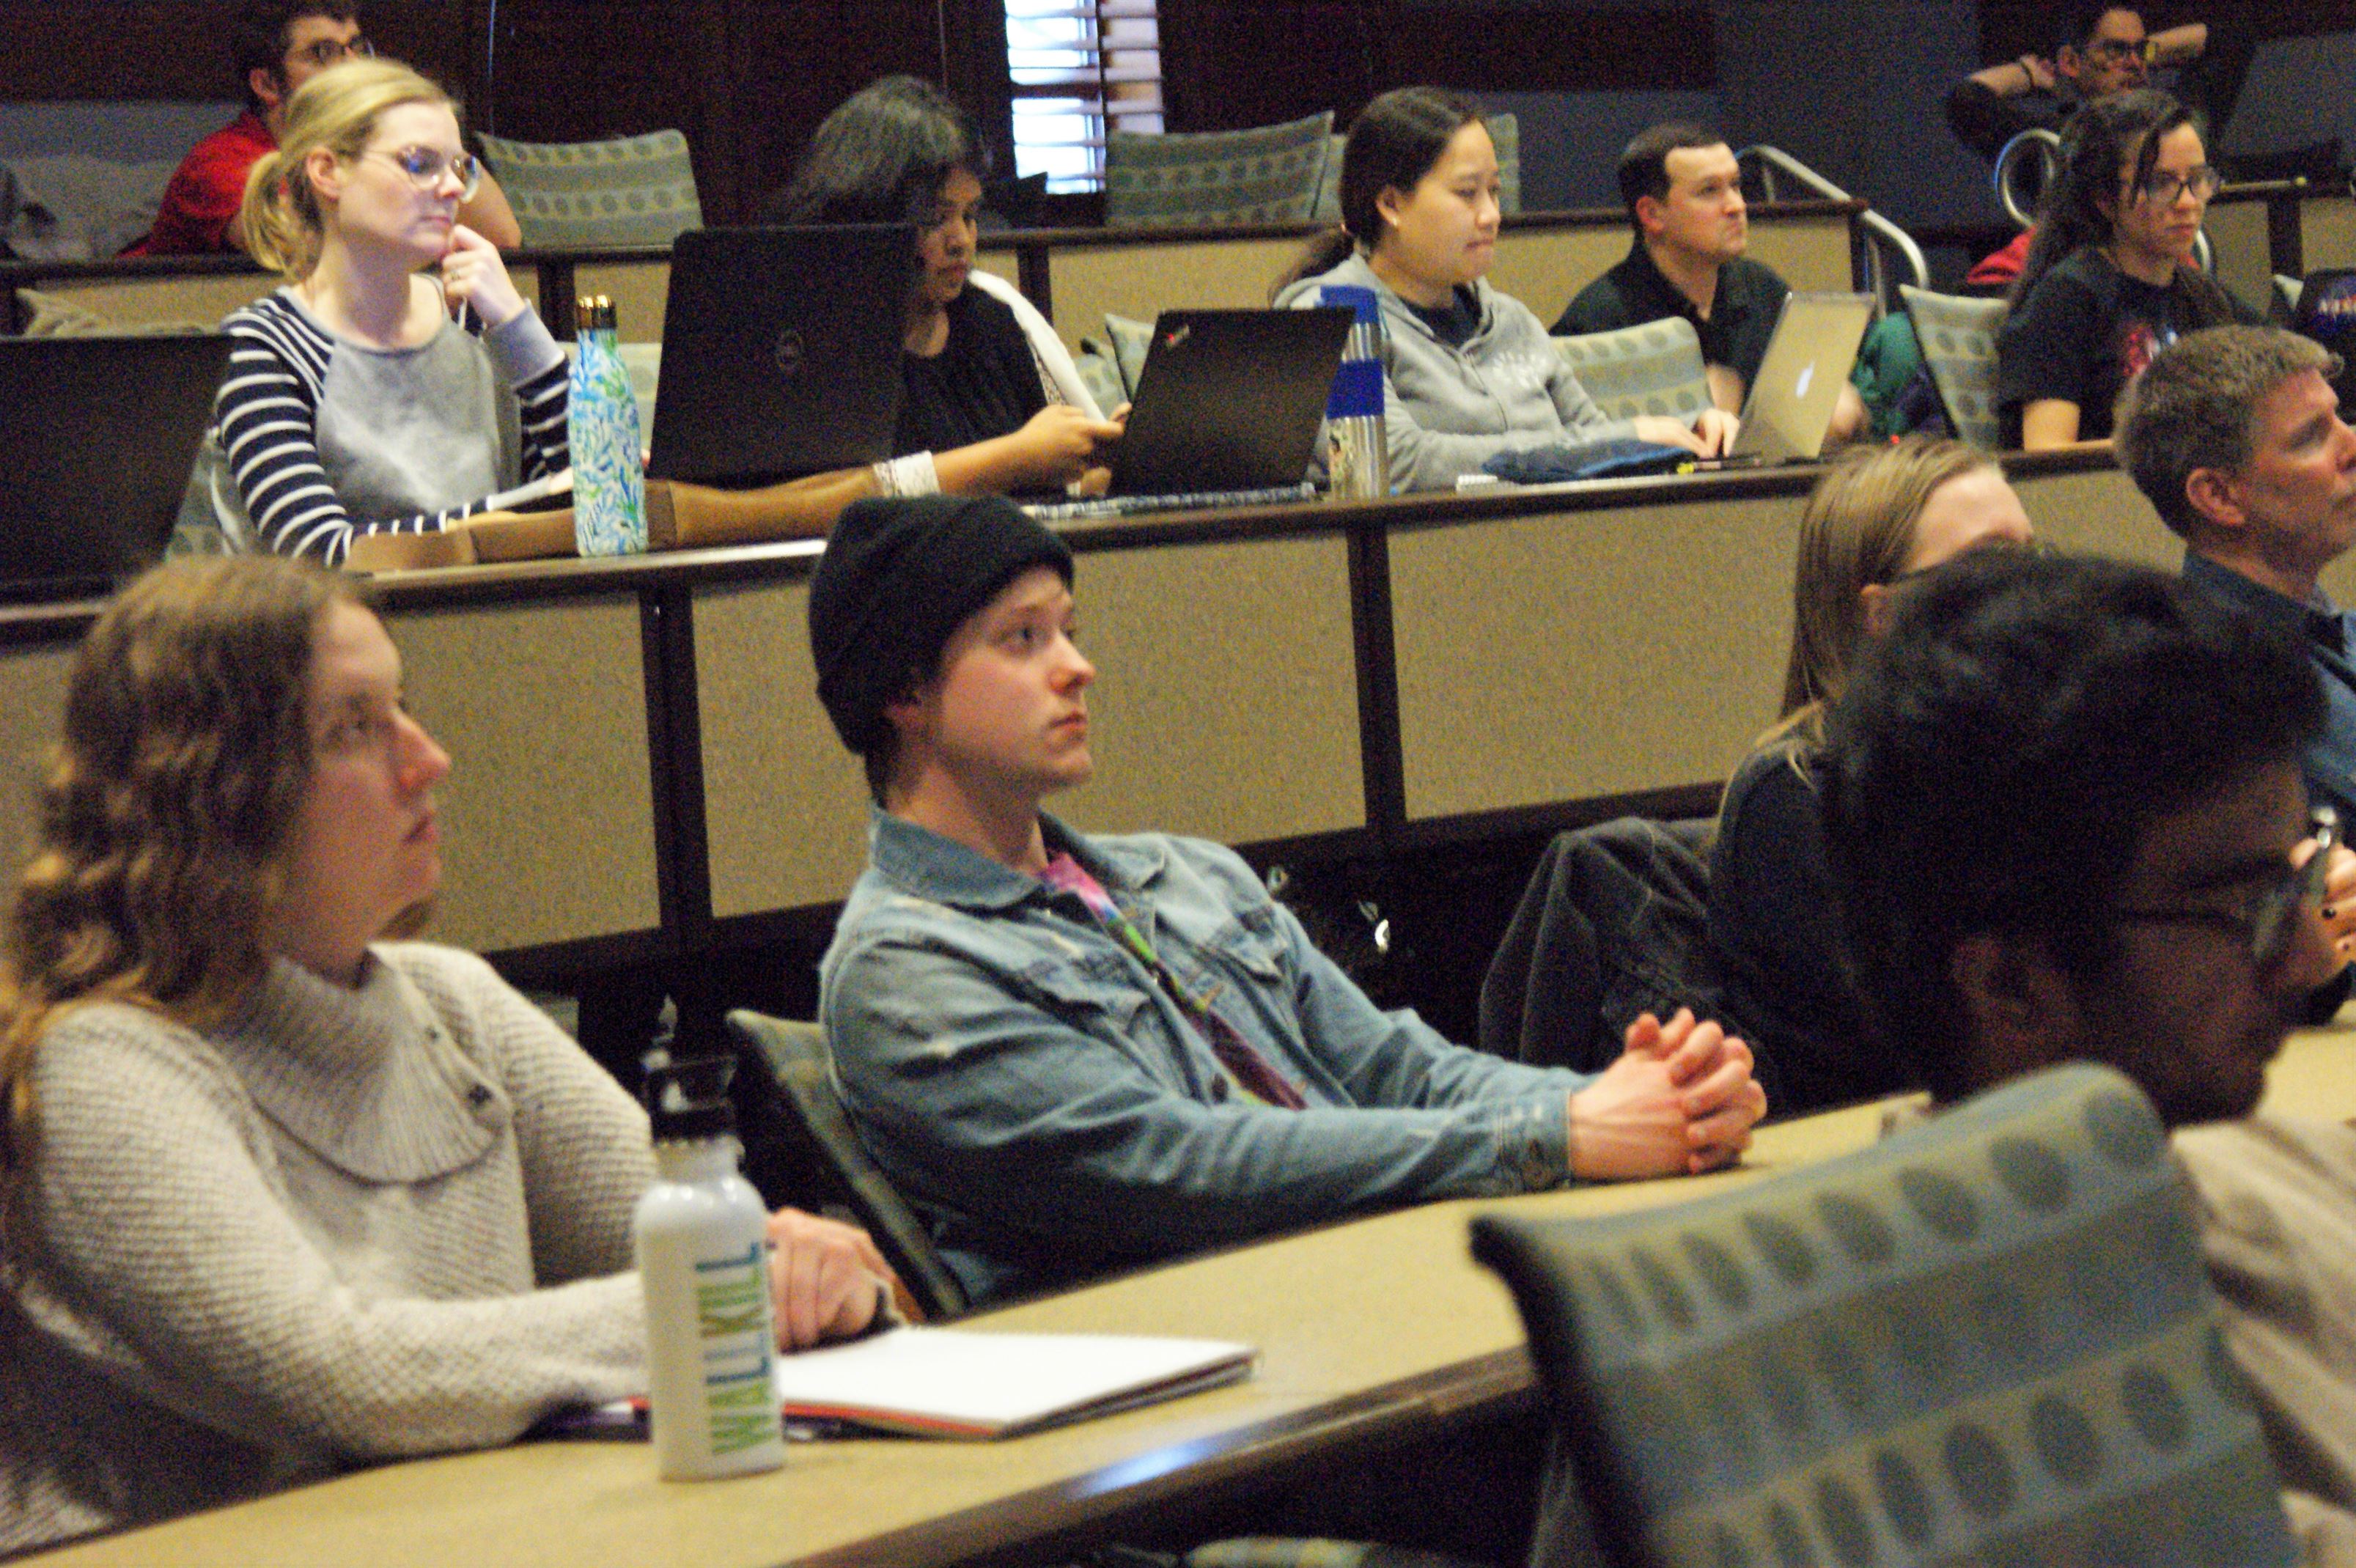 Students listen and take notes on the sustainability seminar. Adrianna Caraballo | The Montclarion